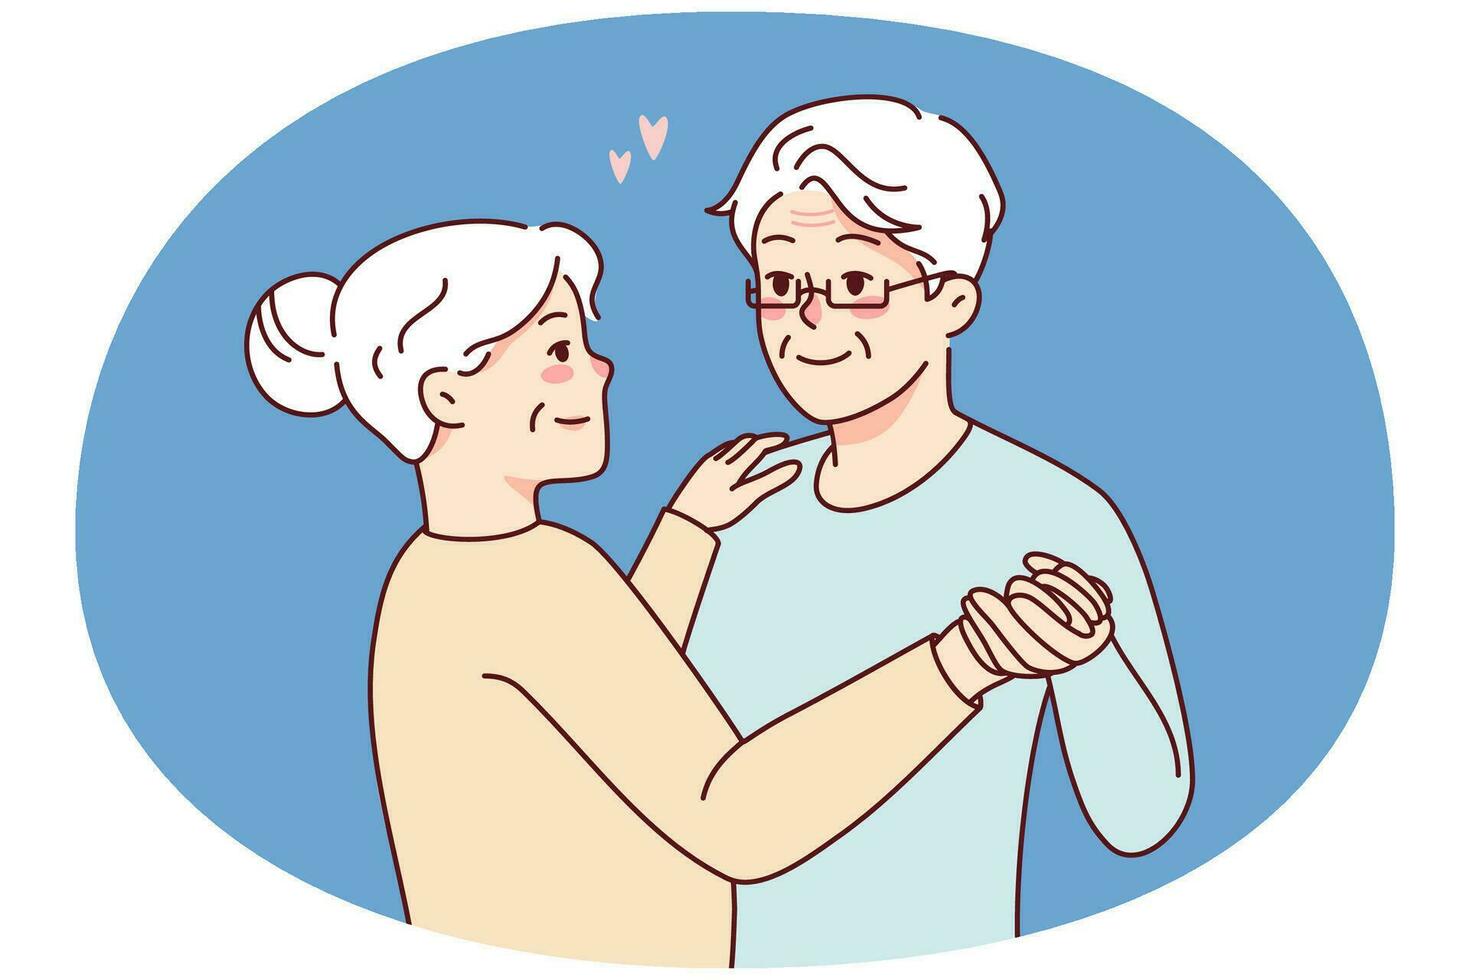 Happy elderly couple dancing together. Smiling mature man and woman enjoy romance and joyful calm retirement. Love and relationships. Vector illustration.